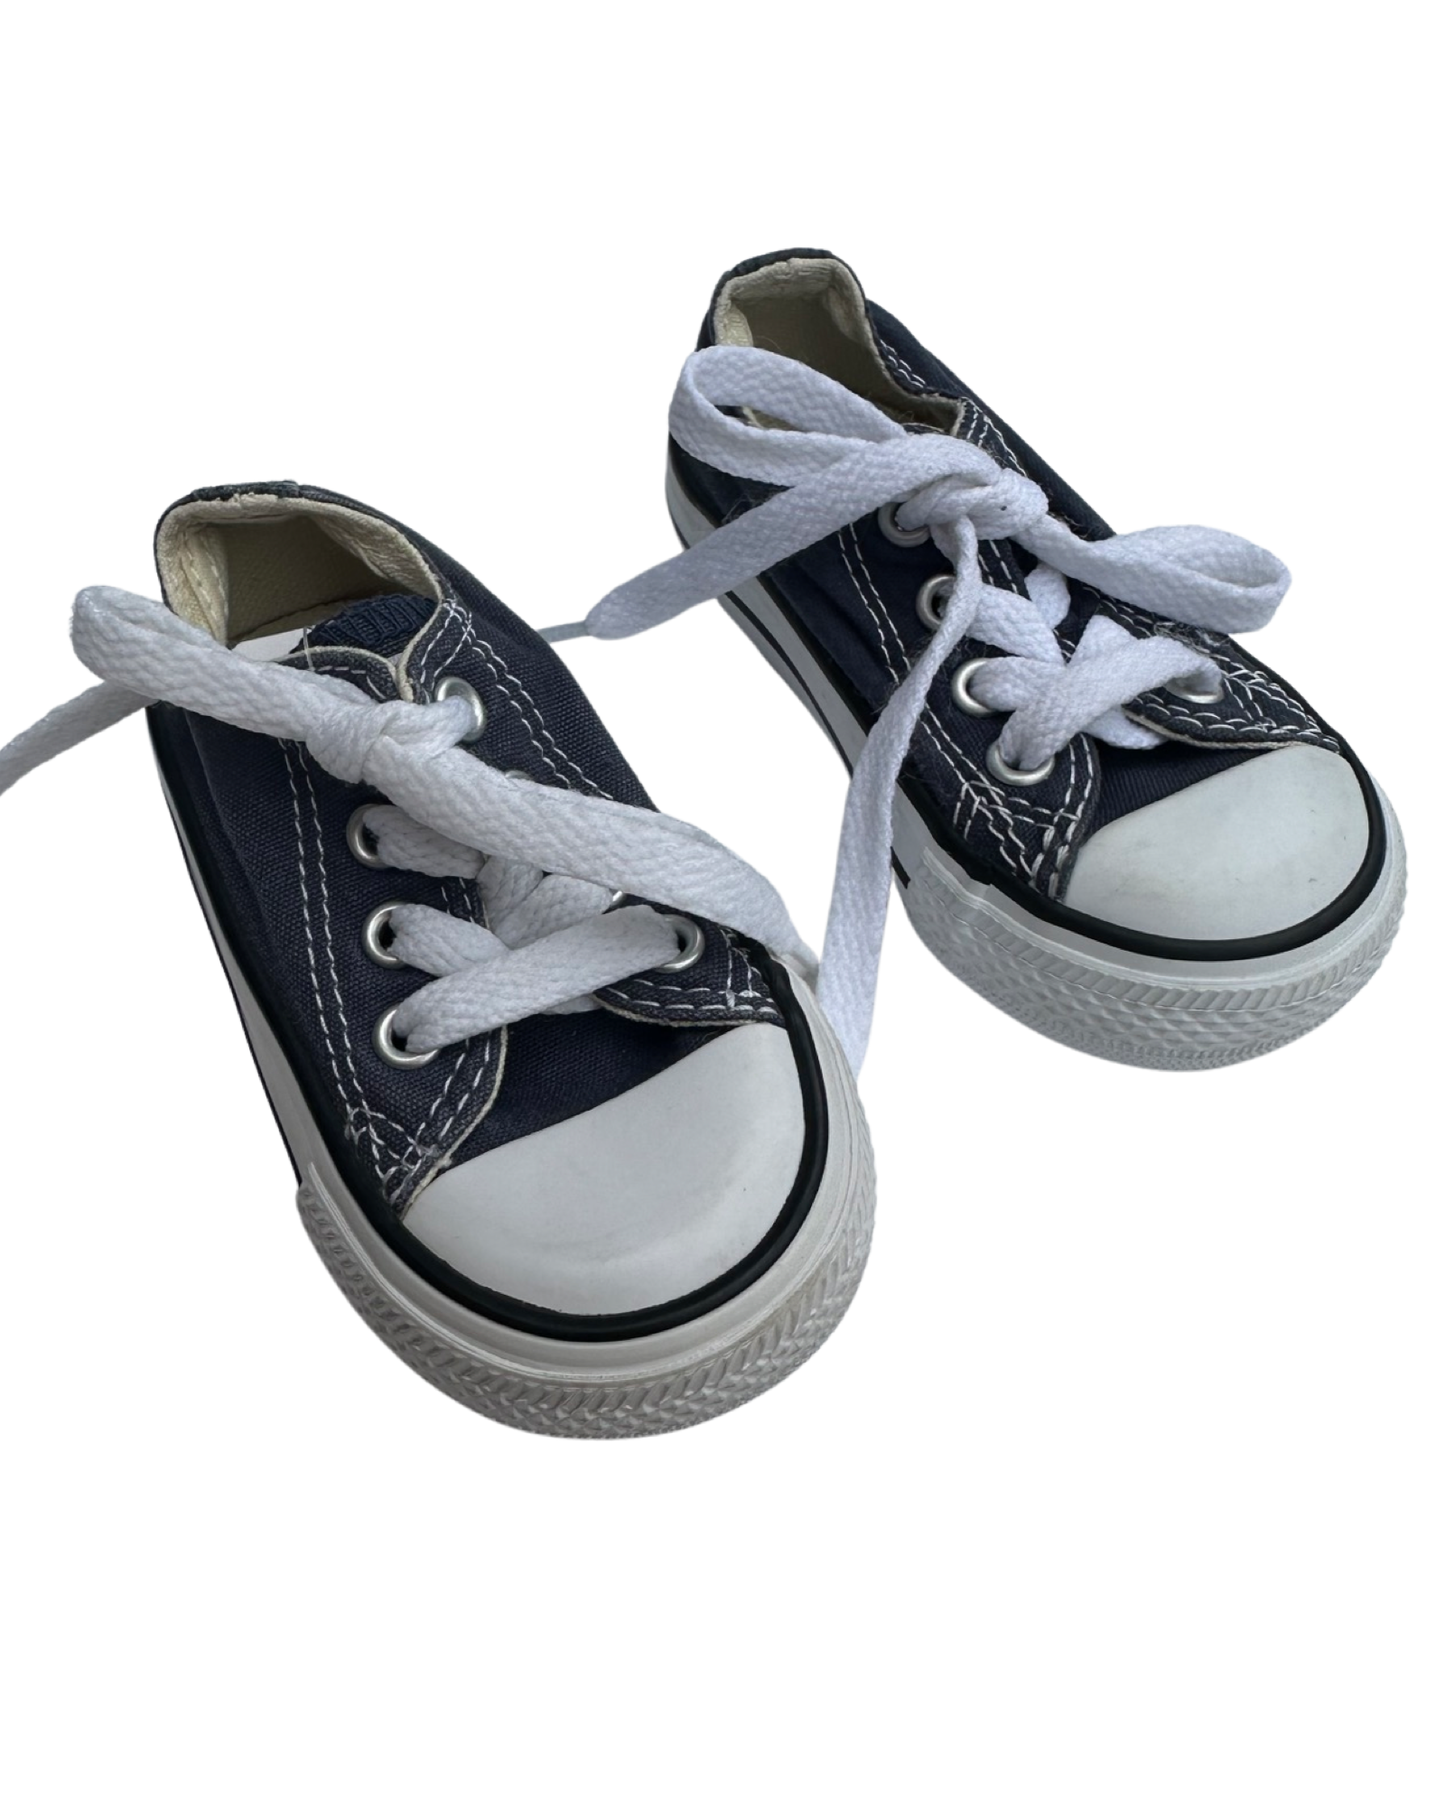 Converse Chuck Taylor classic low lace up infant trainers in navy(UK4/EU20)